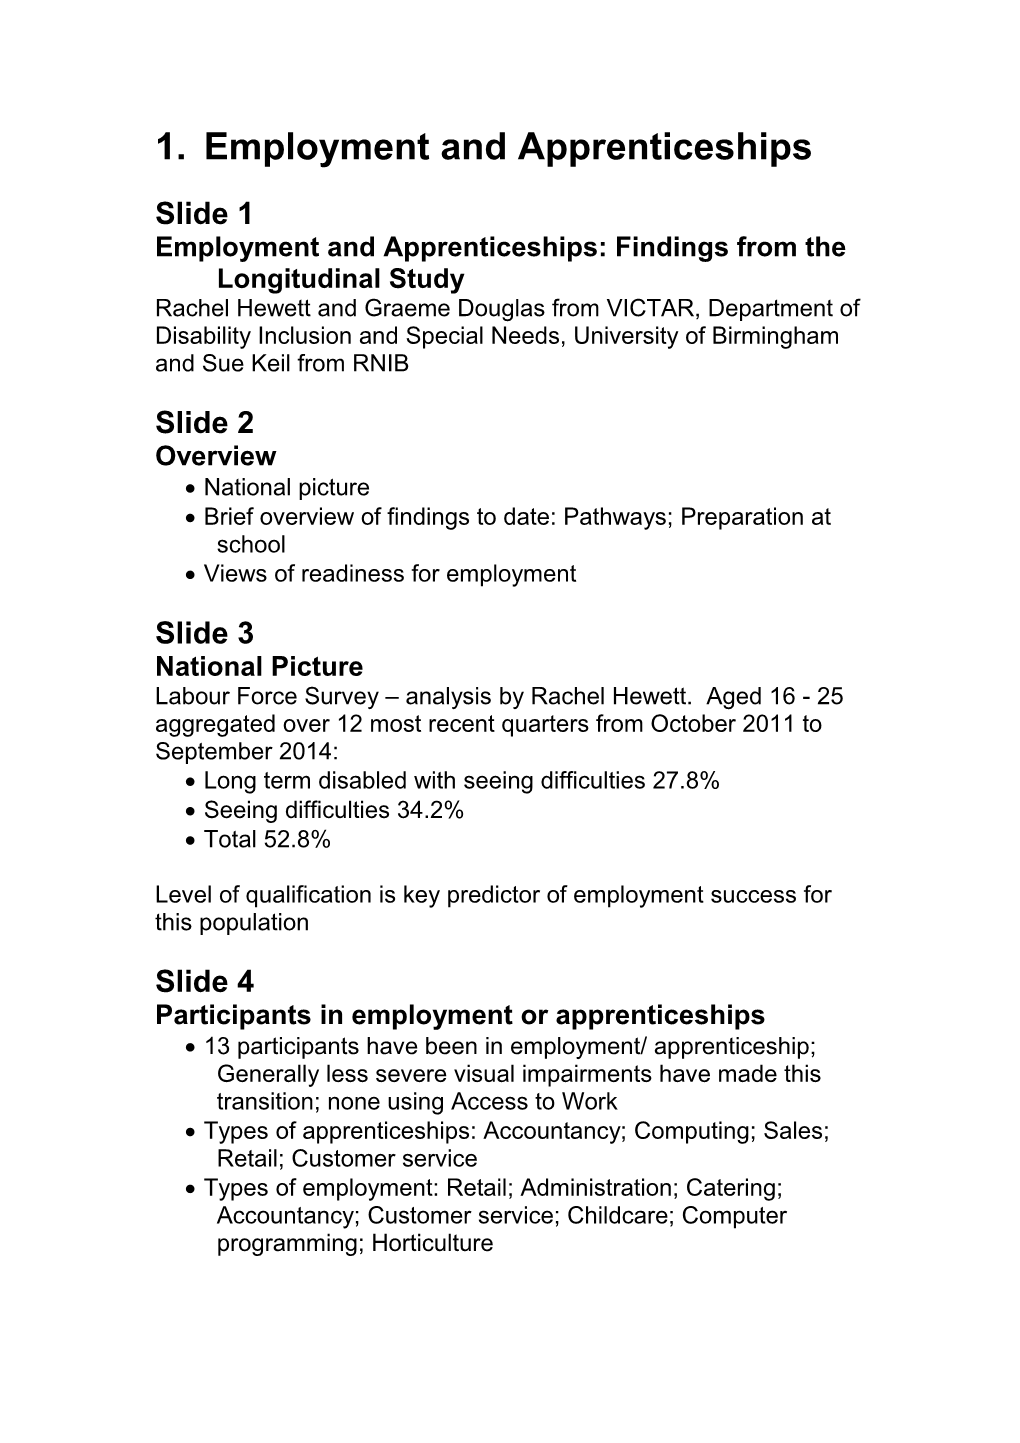 Employment and Apprenticeships: Findings from the Longitudinal Study